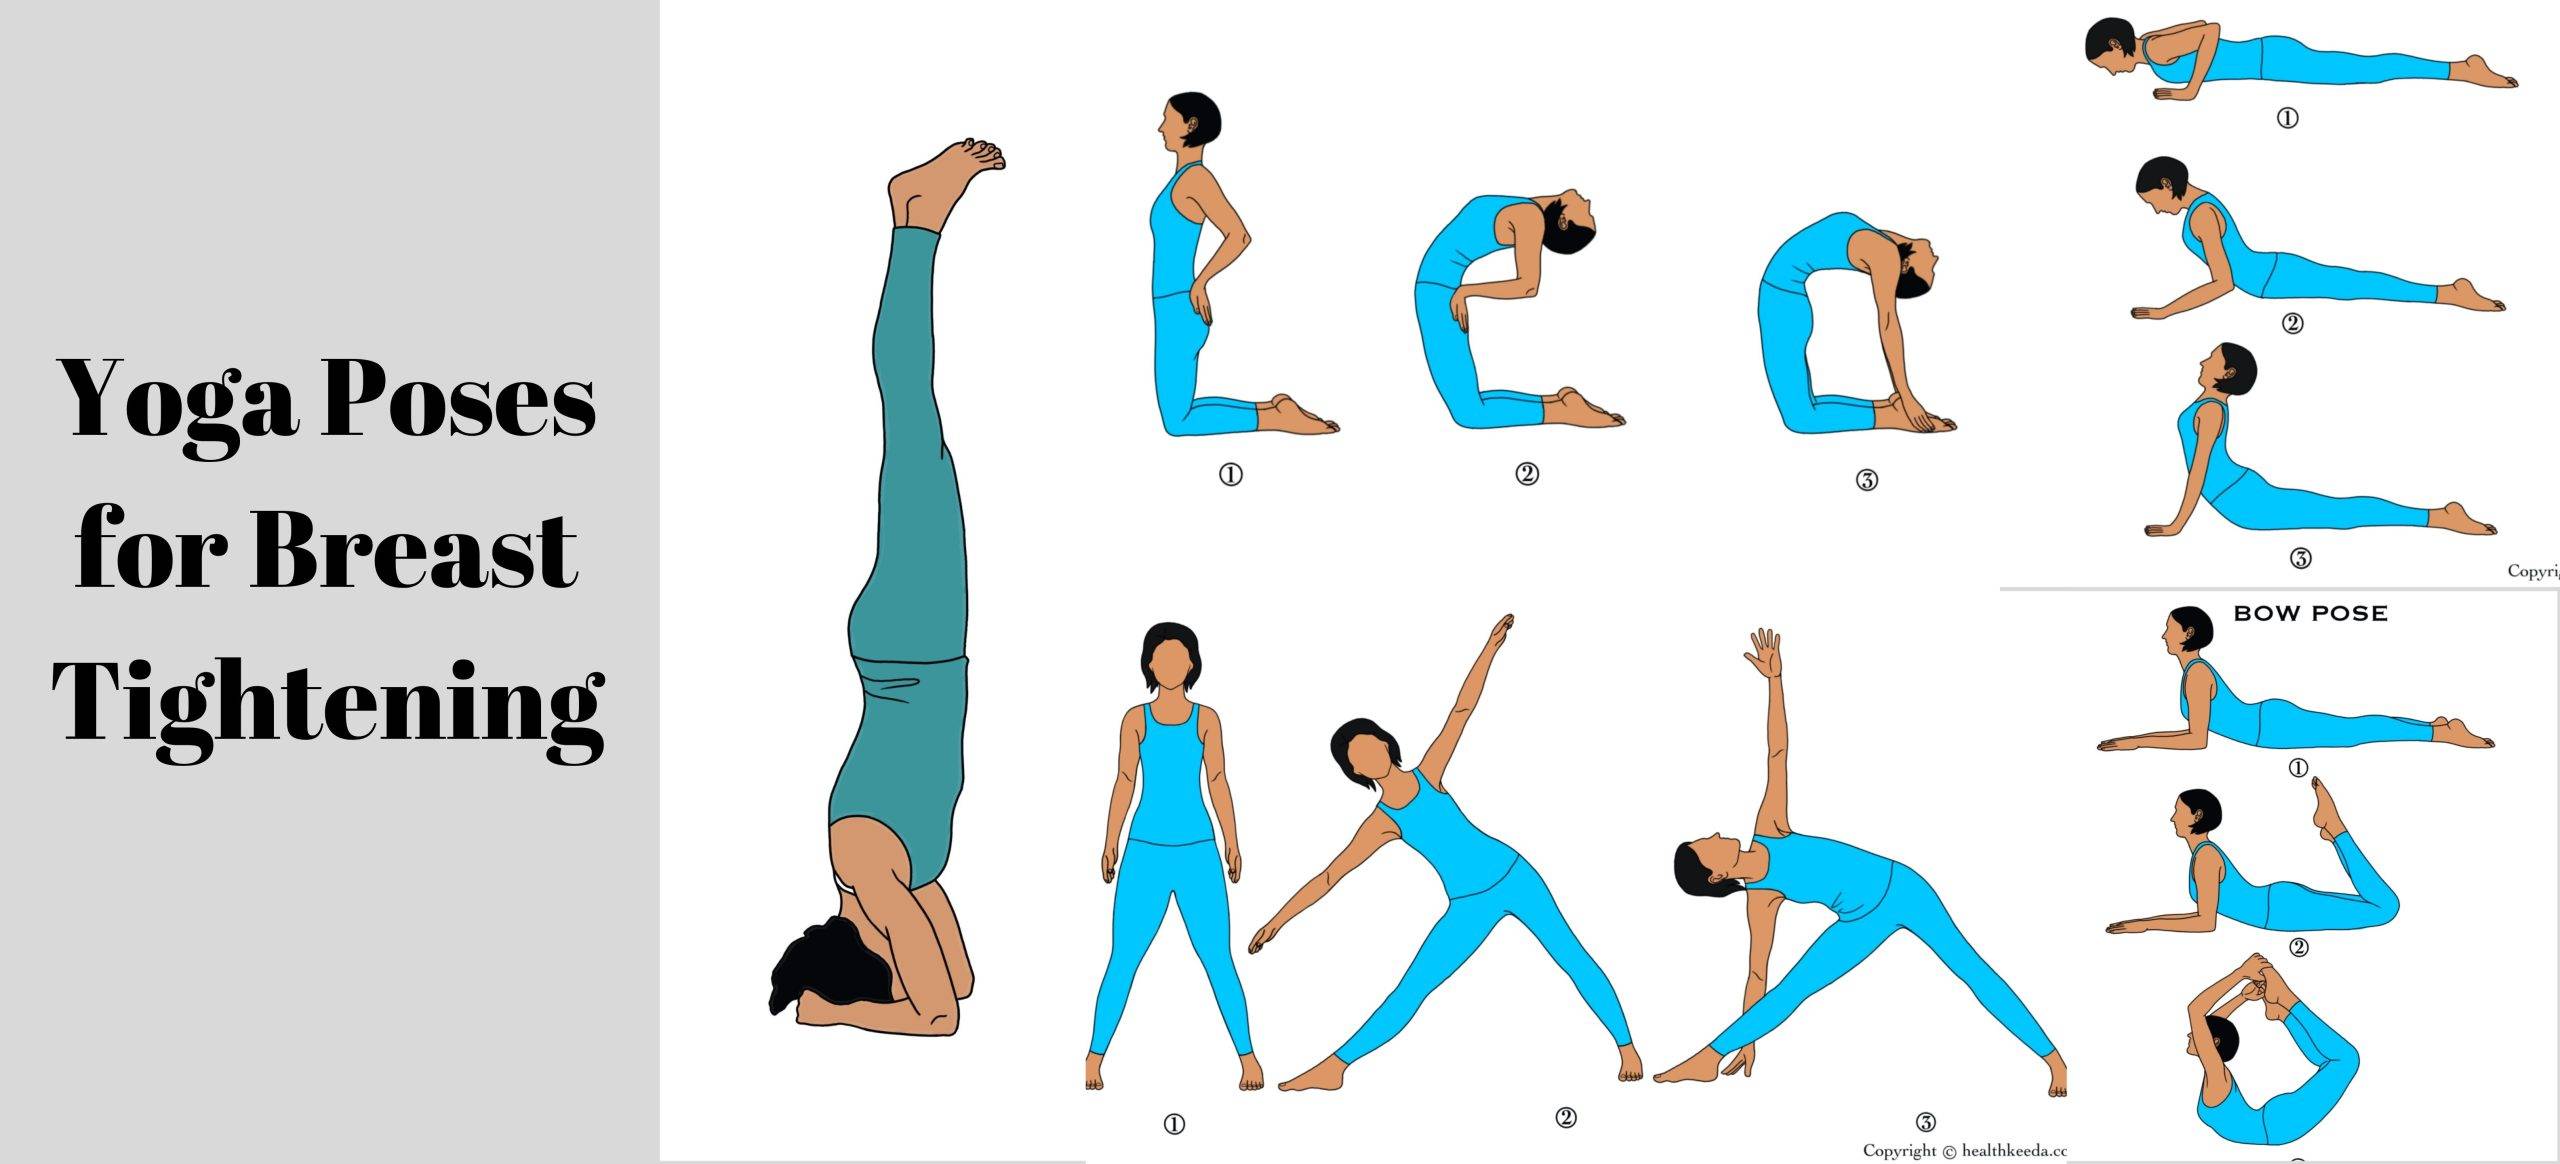 Yoga Poses for Breast TighteningYoga Poses for Breast Tightening